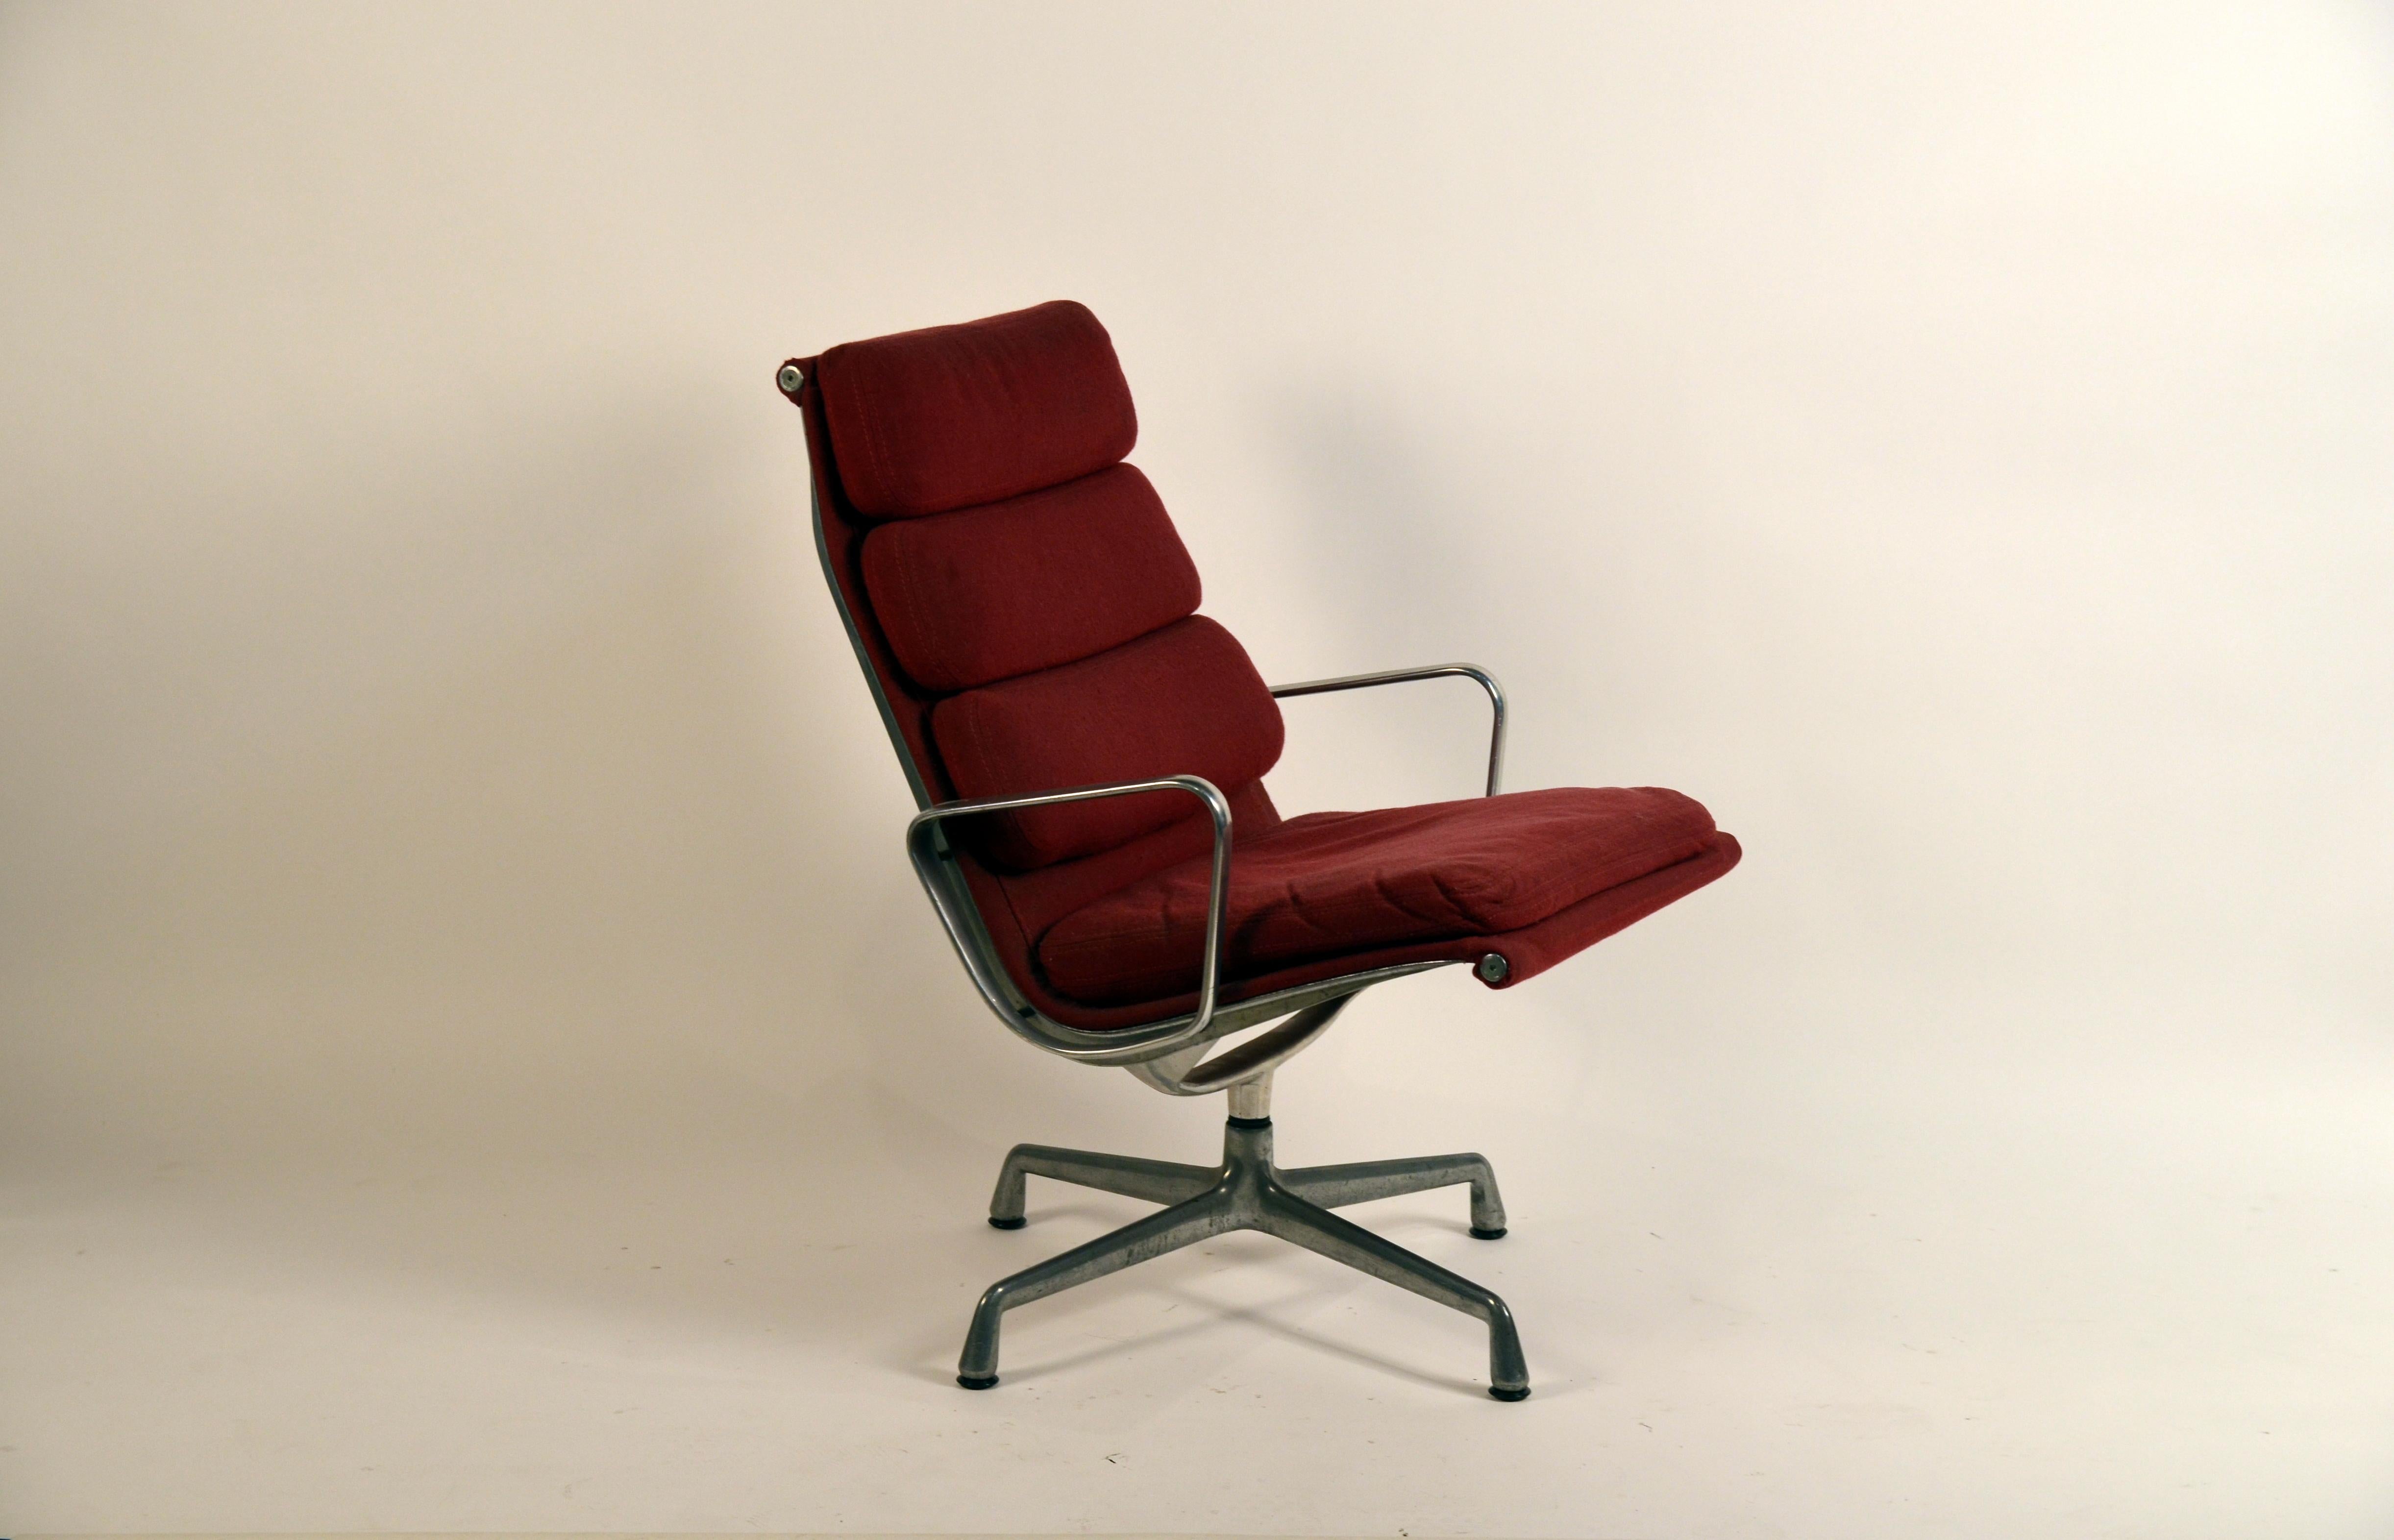 Burgungy soft pad swiveling lounge chair for Herman Miller. Model EA 216, designed by Charles & Ray Eames, 1969. Super comfortable.